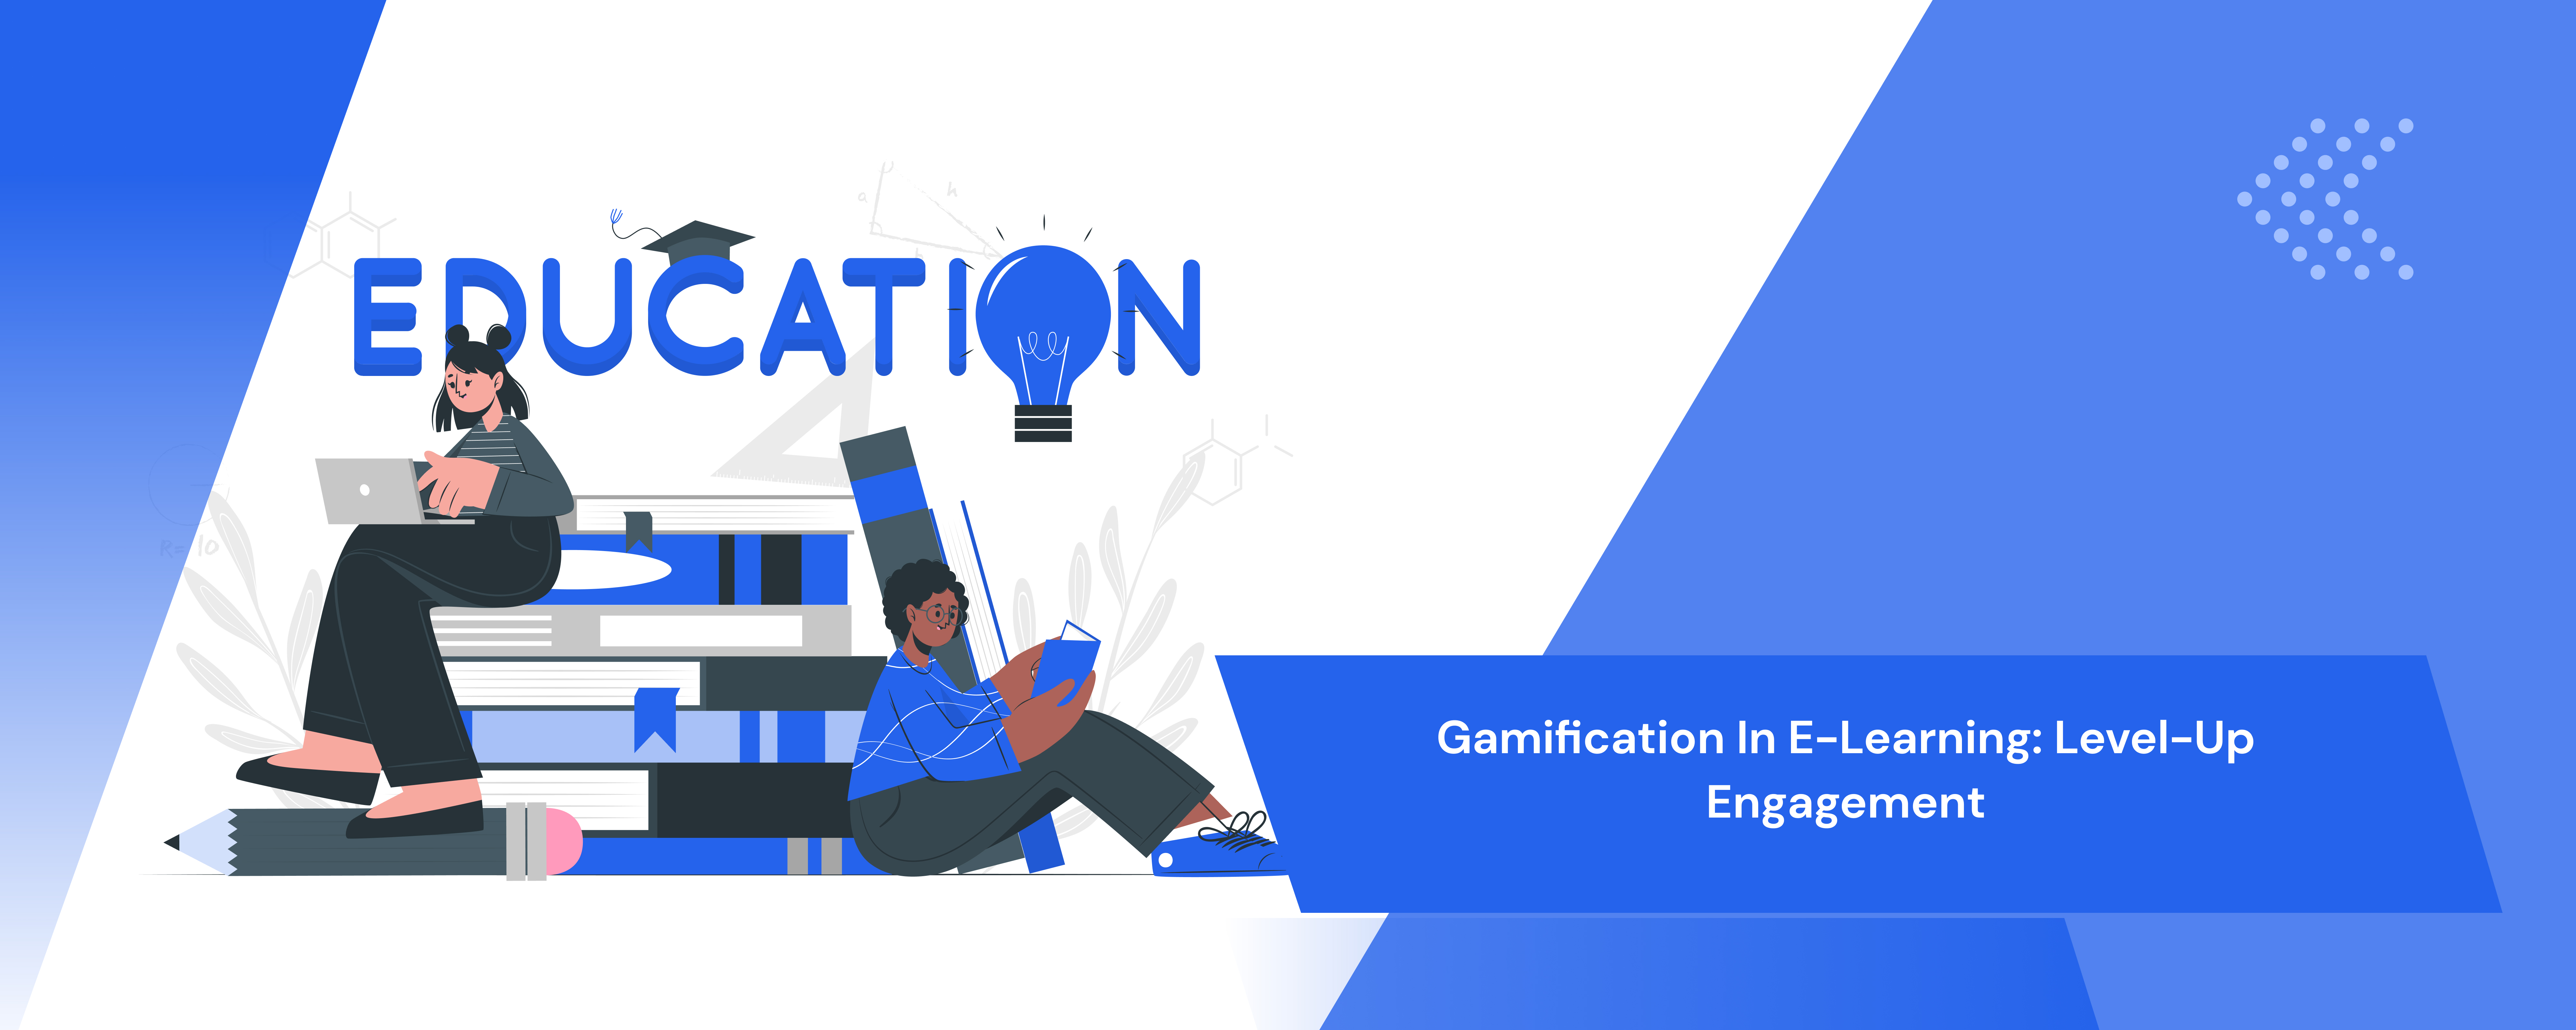 Gamification in E-Learning: Level-Up Engagement